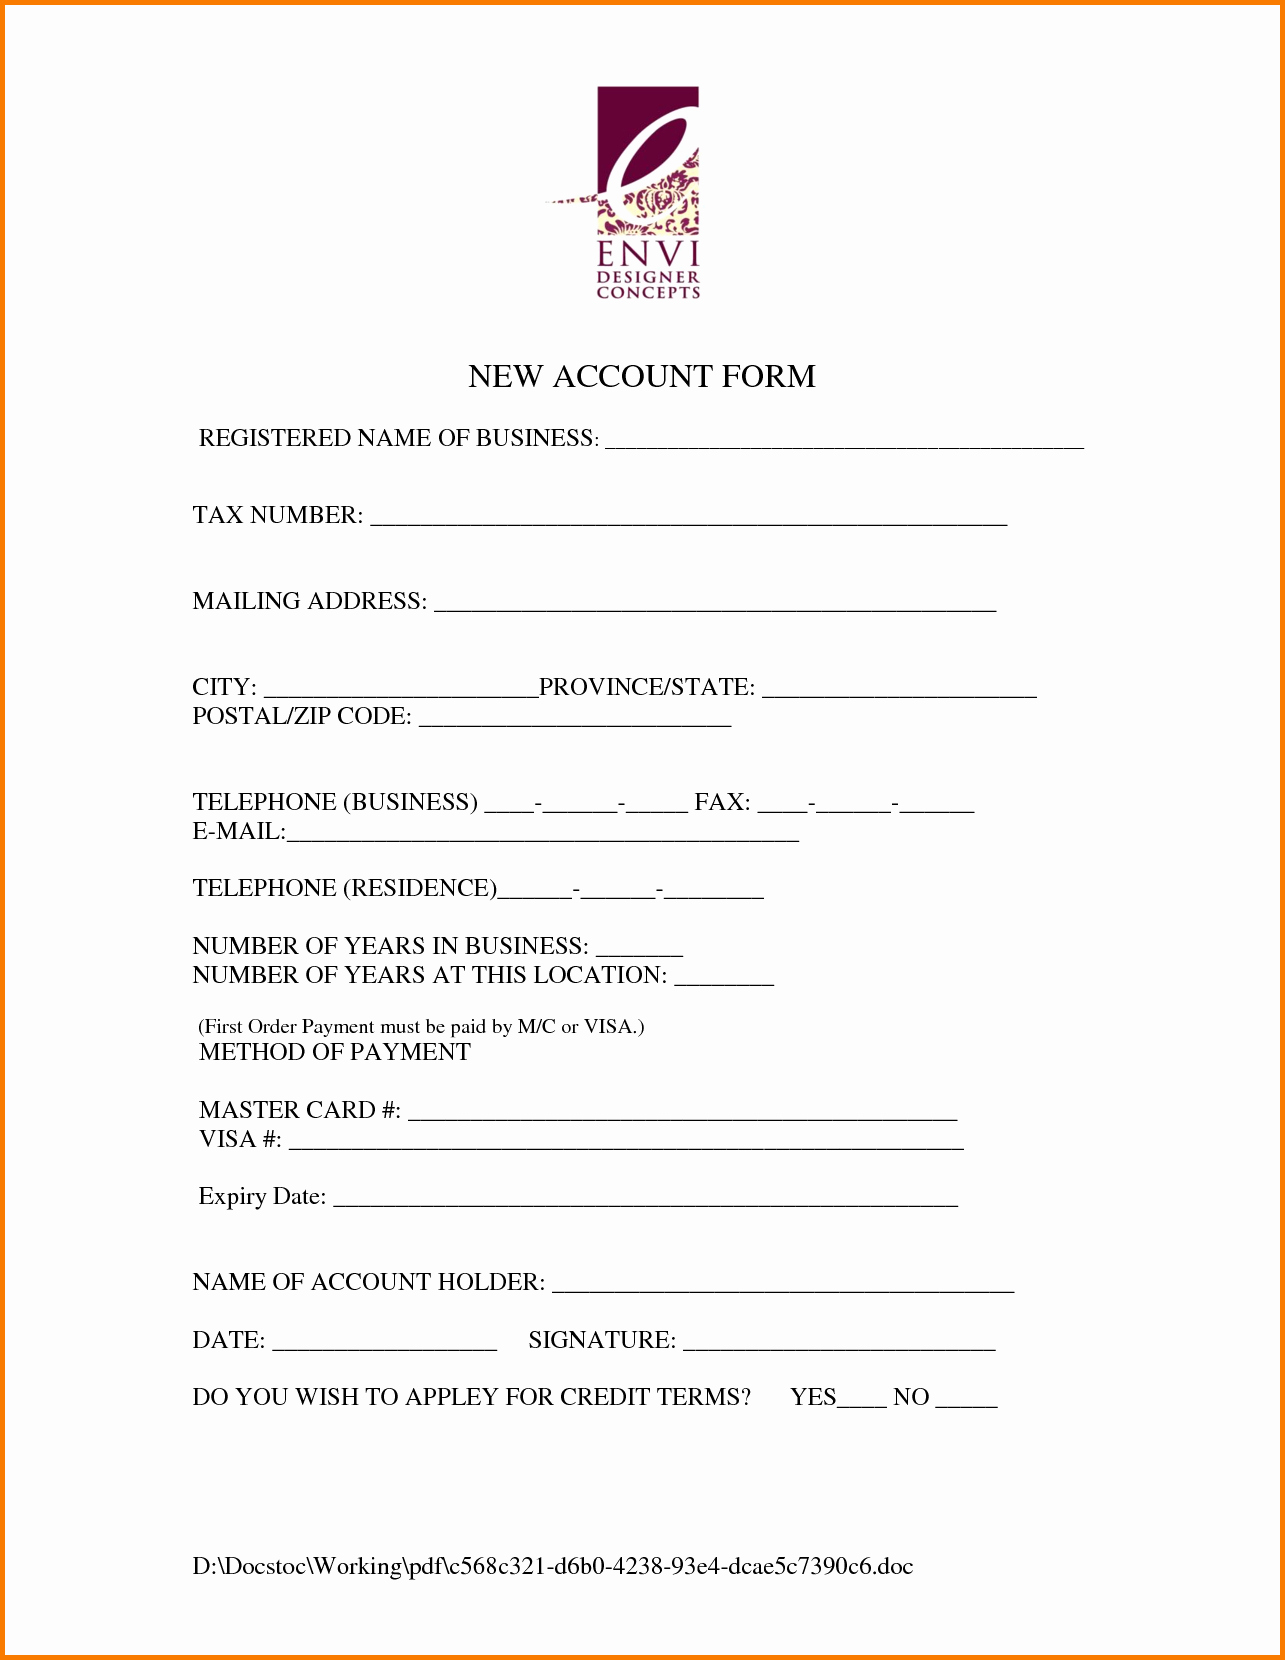 Contact Information form Template Word Awesome Customer Information Template